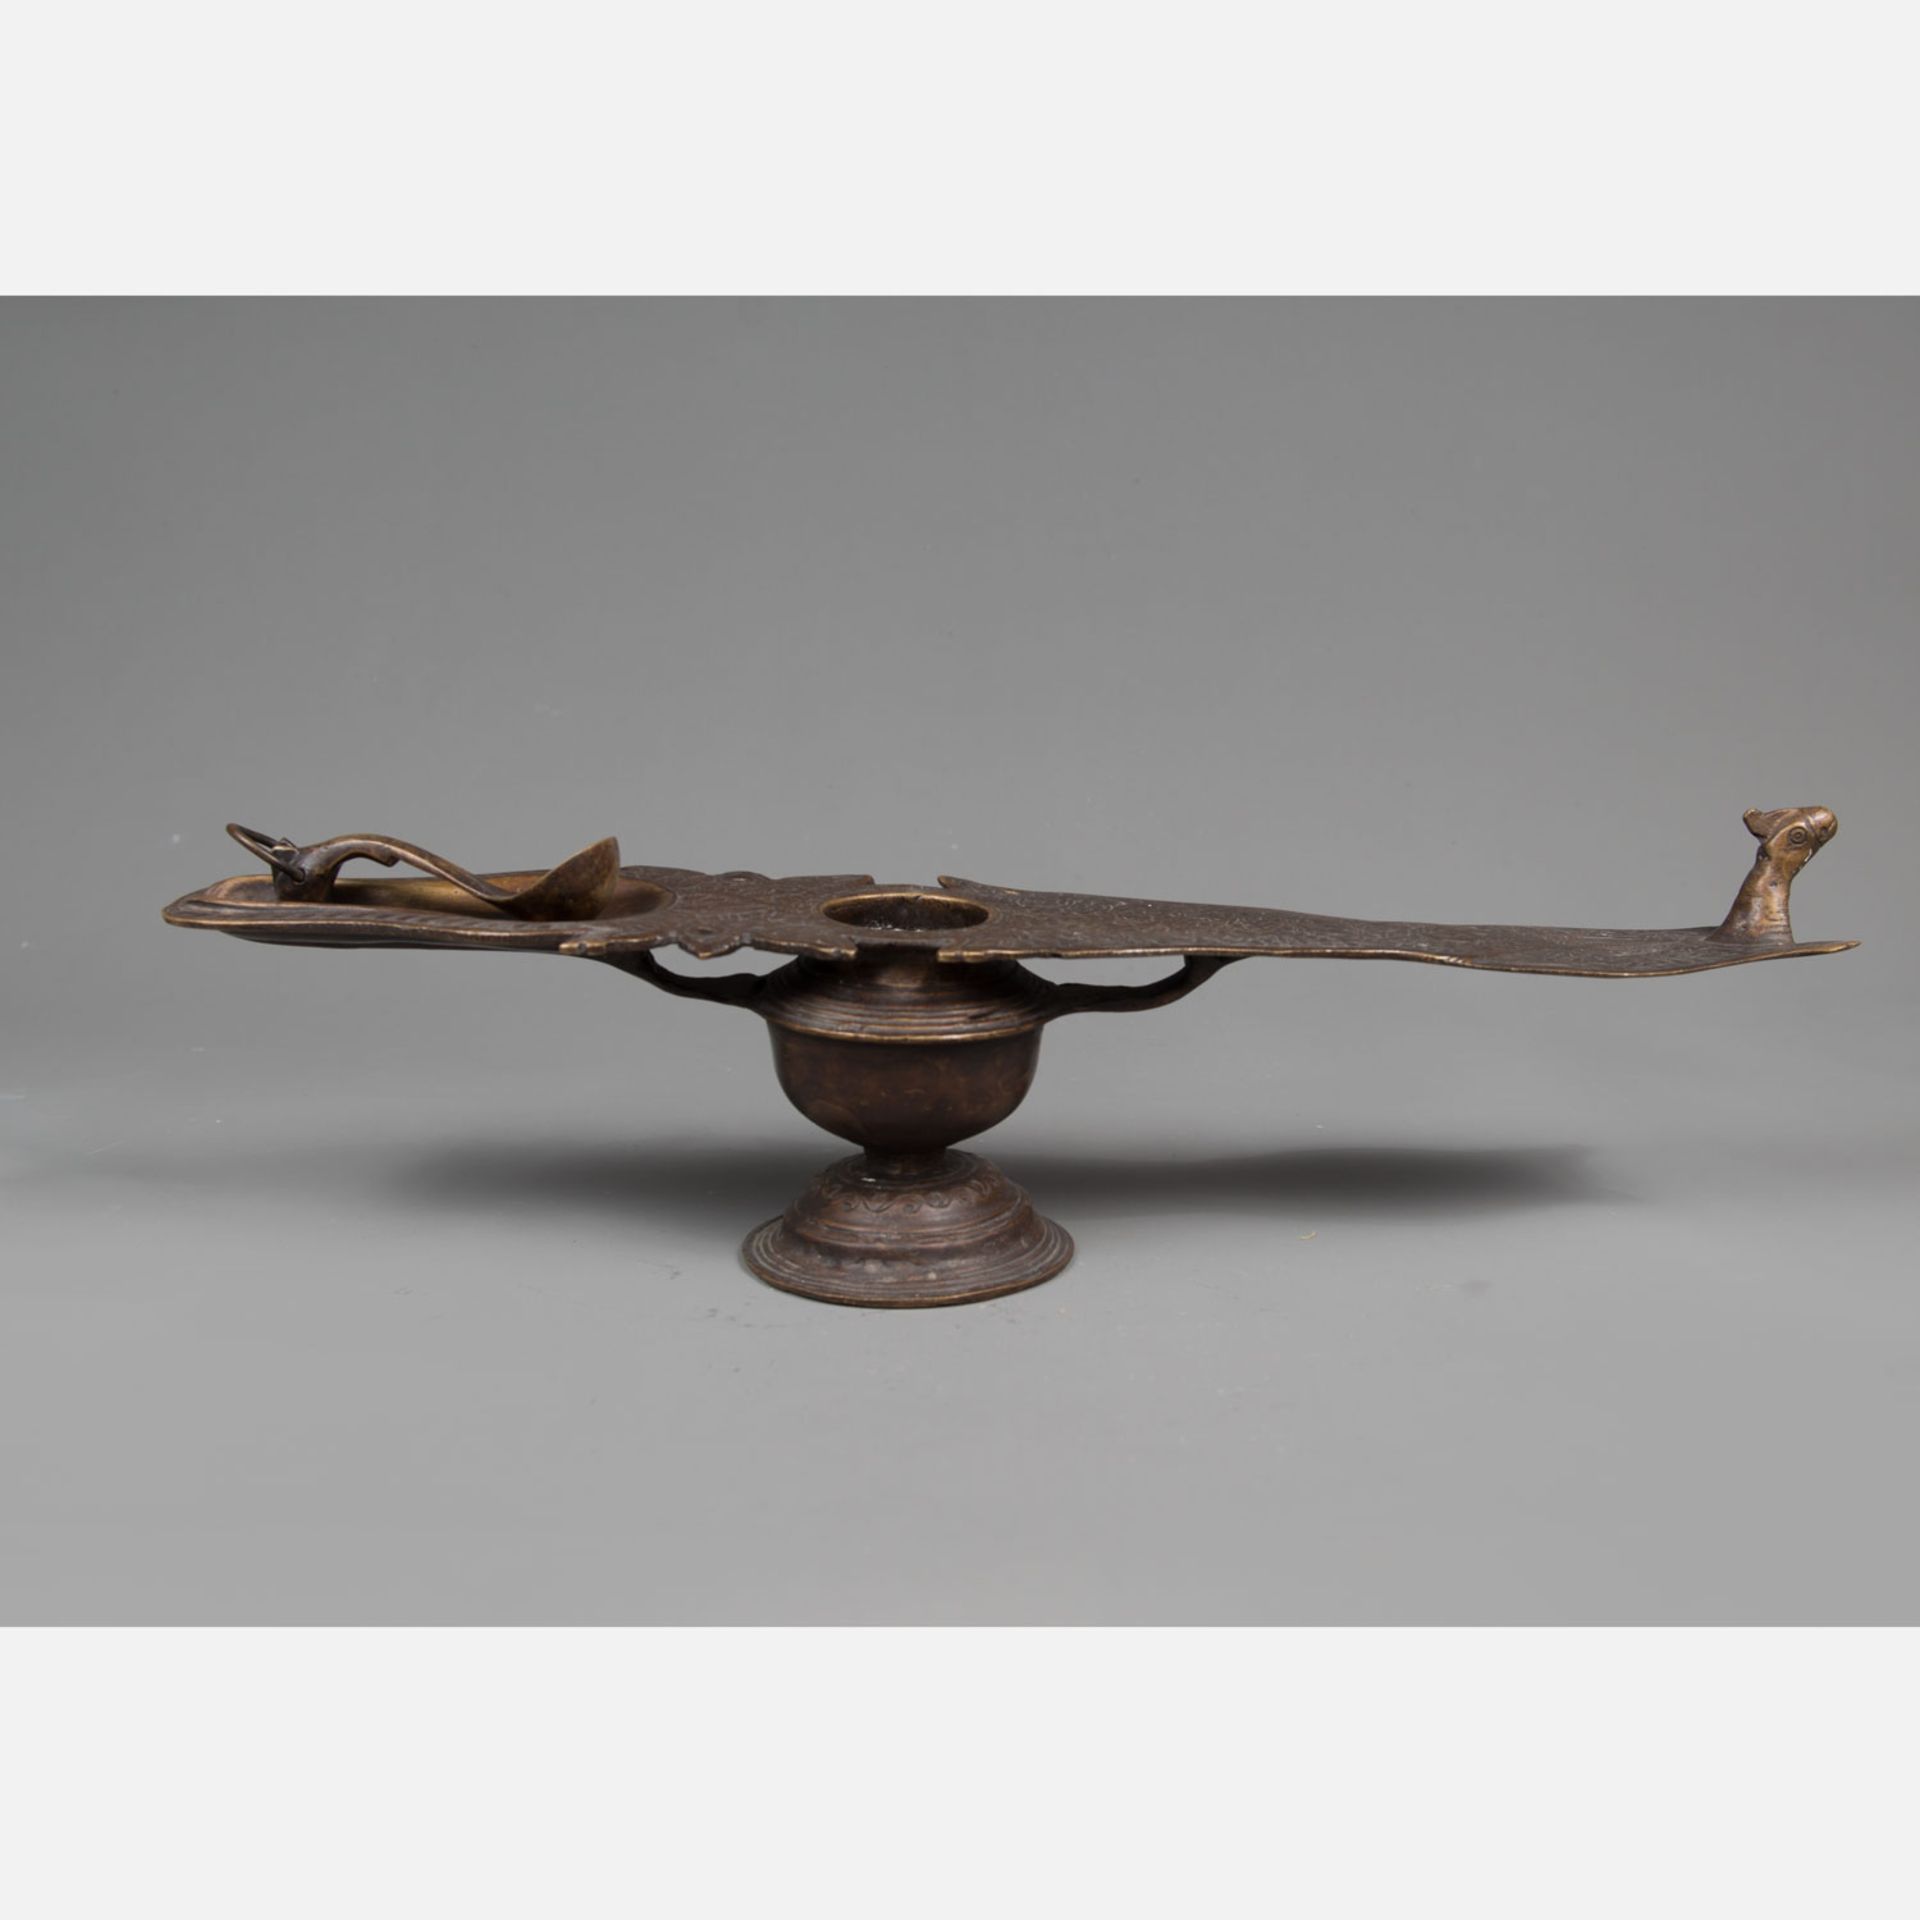 Indochinese oil lamp - Image 3 of 3